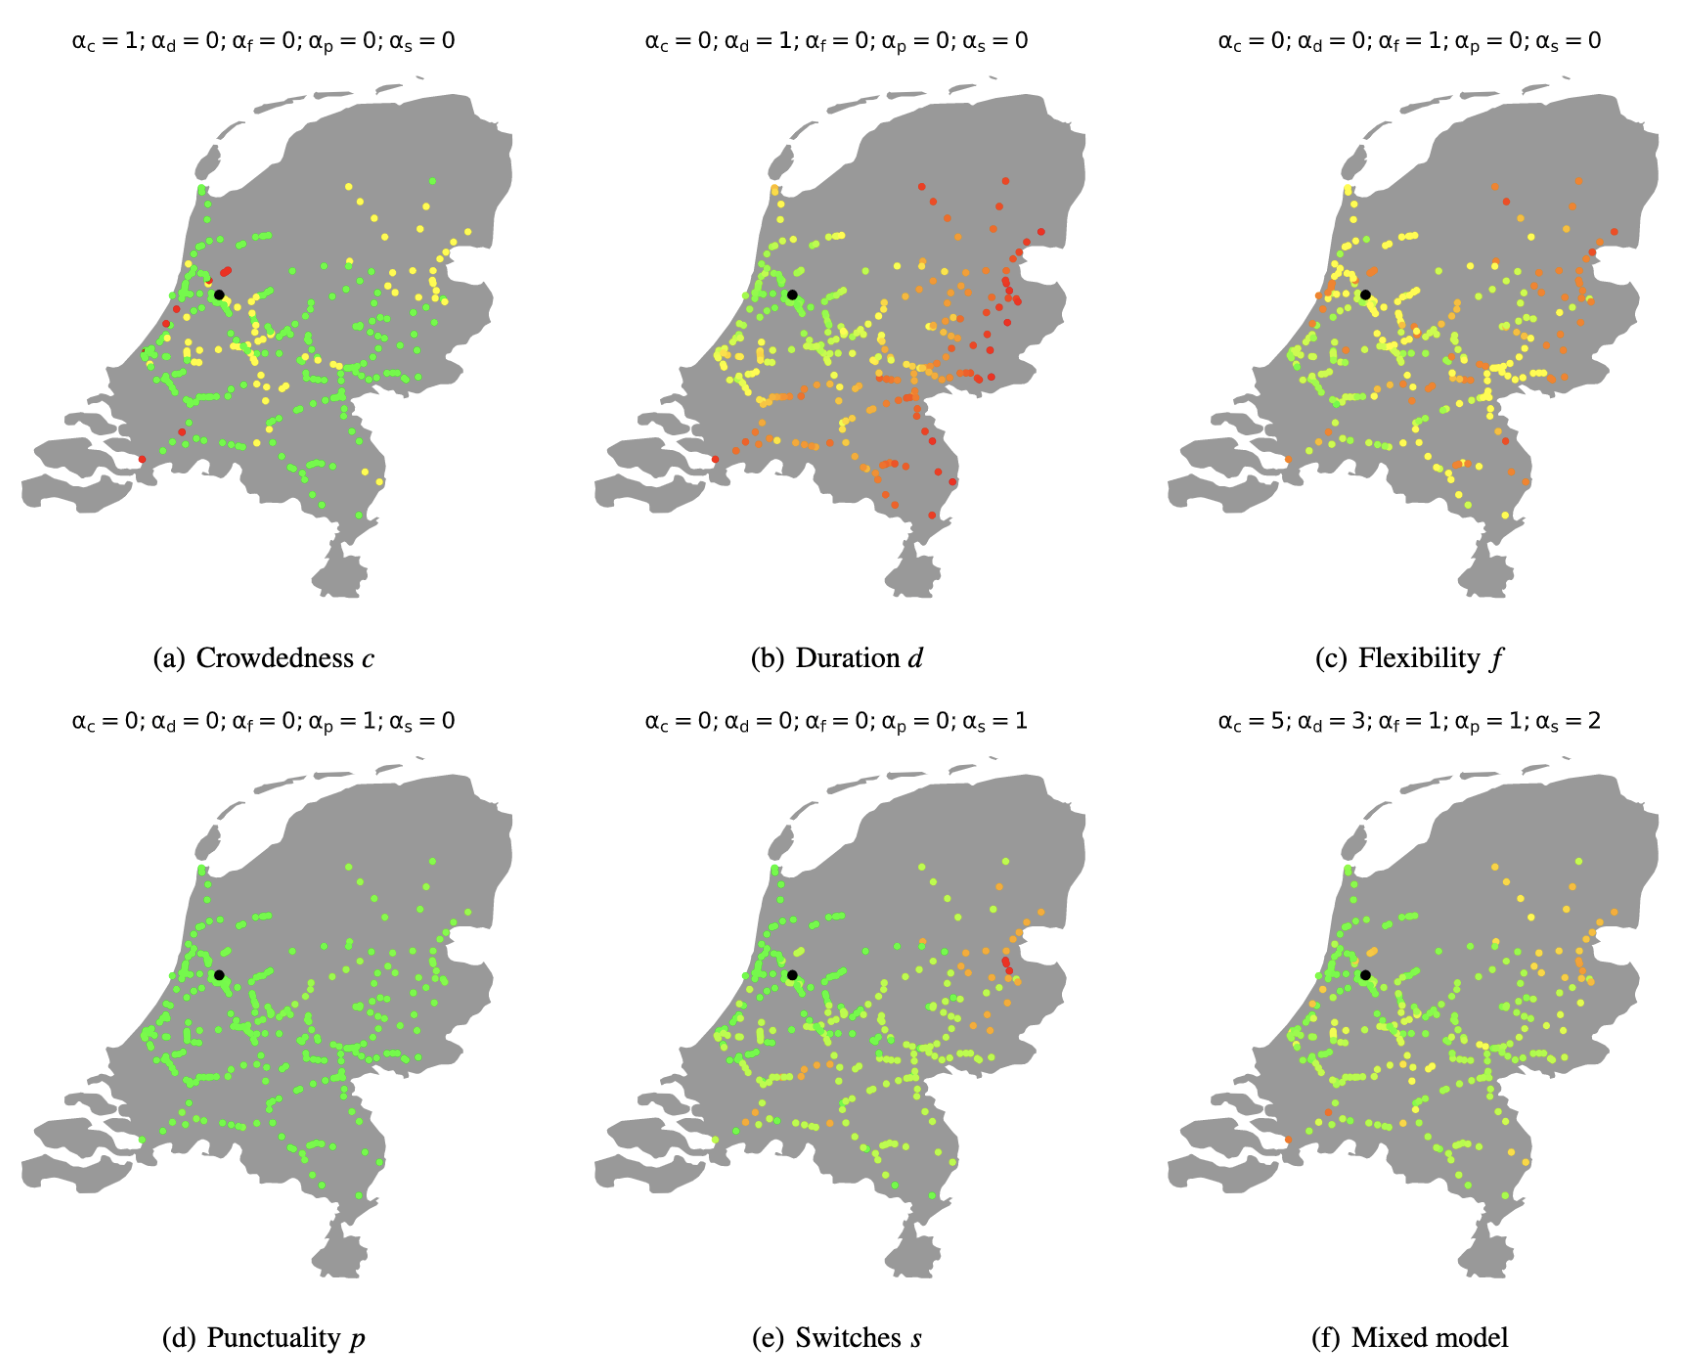 Stress maps with different settings for \( \alpha \)s; green indicates low stress and red indicates high stress. Amsterdam Central Station (ASD) is marked in black. The mixed model uses my preferences as \( \alpha \) settings.